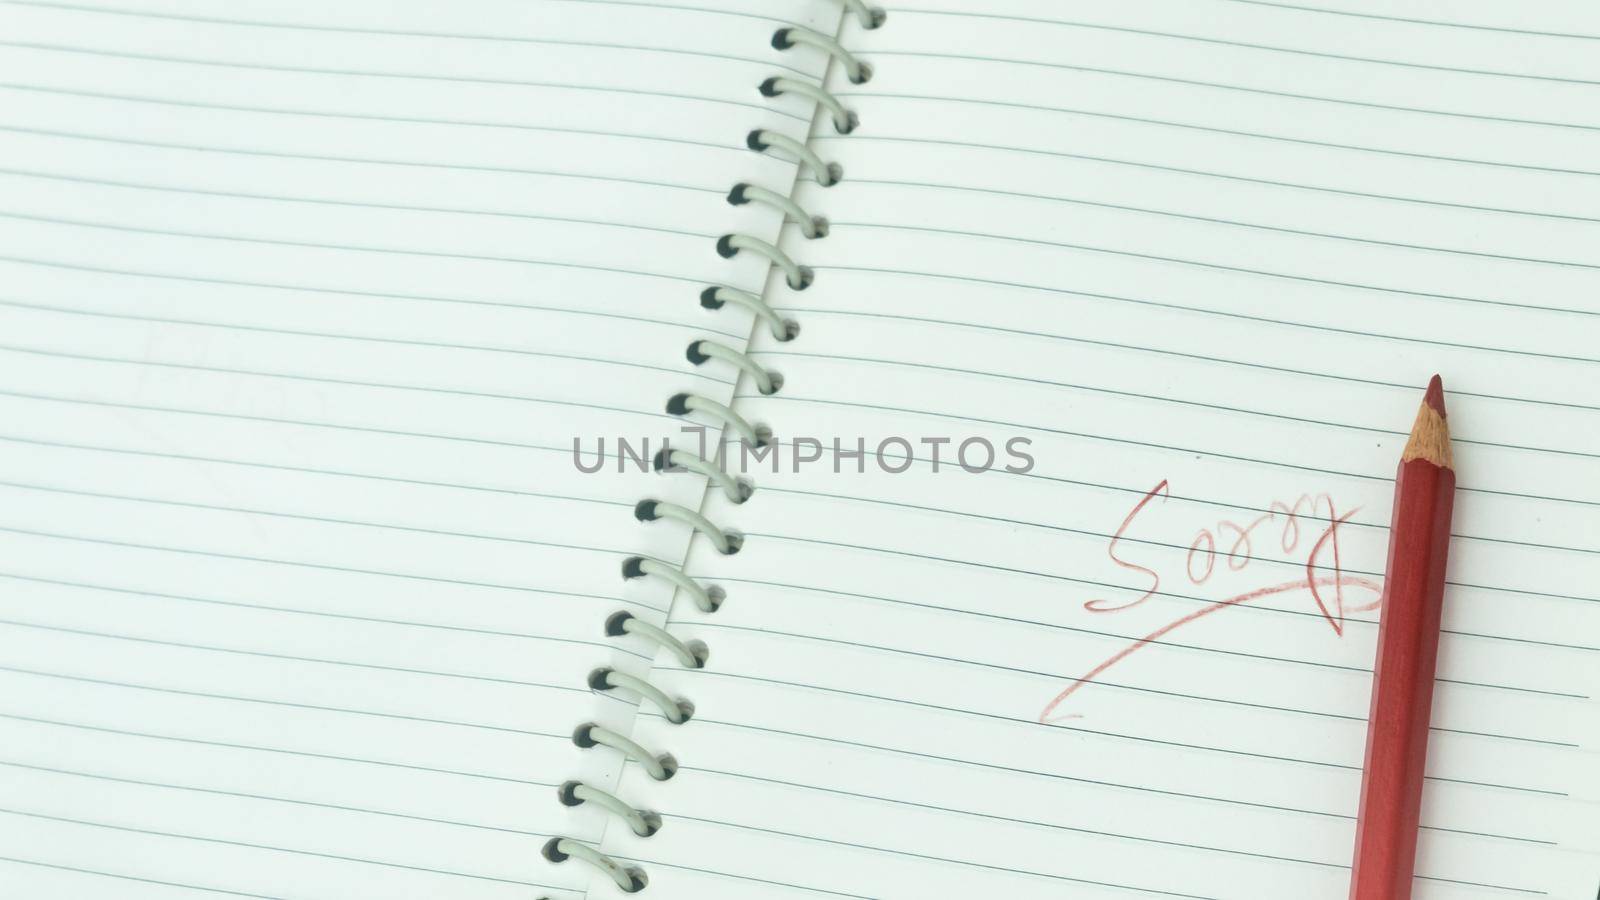 Sorry written on open notebook. Closeup. Mistake learning, blooper, regret sayings in love relationship friendship background. Feelings, apology, reconciliation, misunderstanding concept.